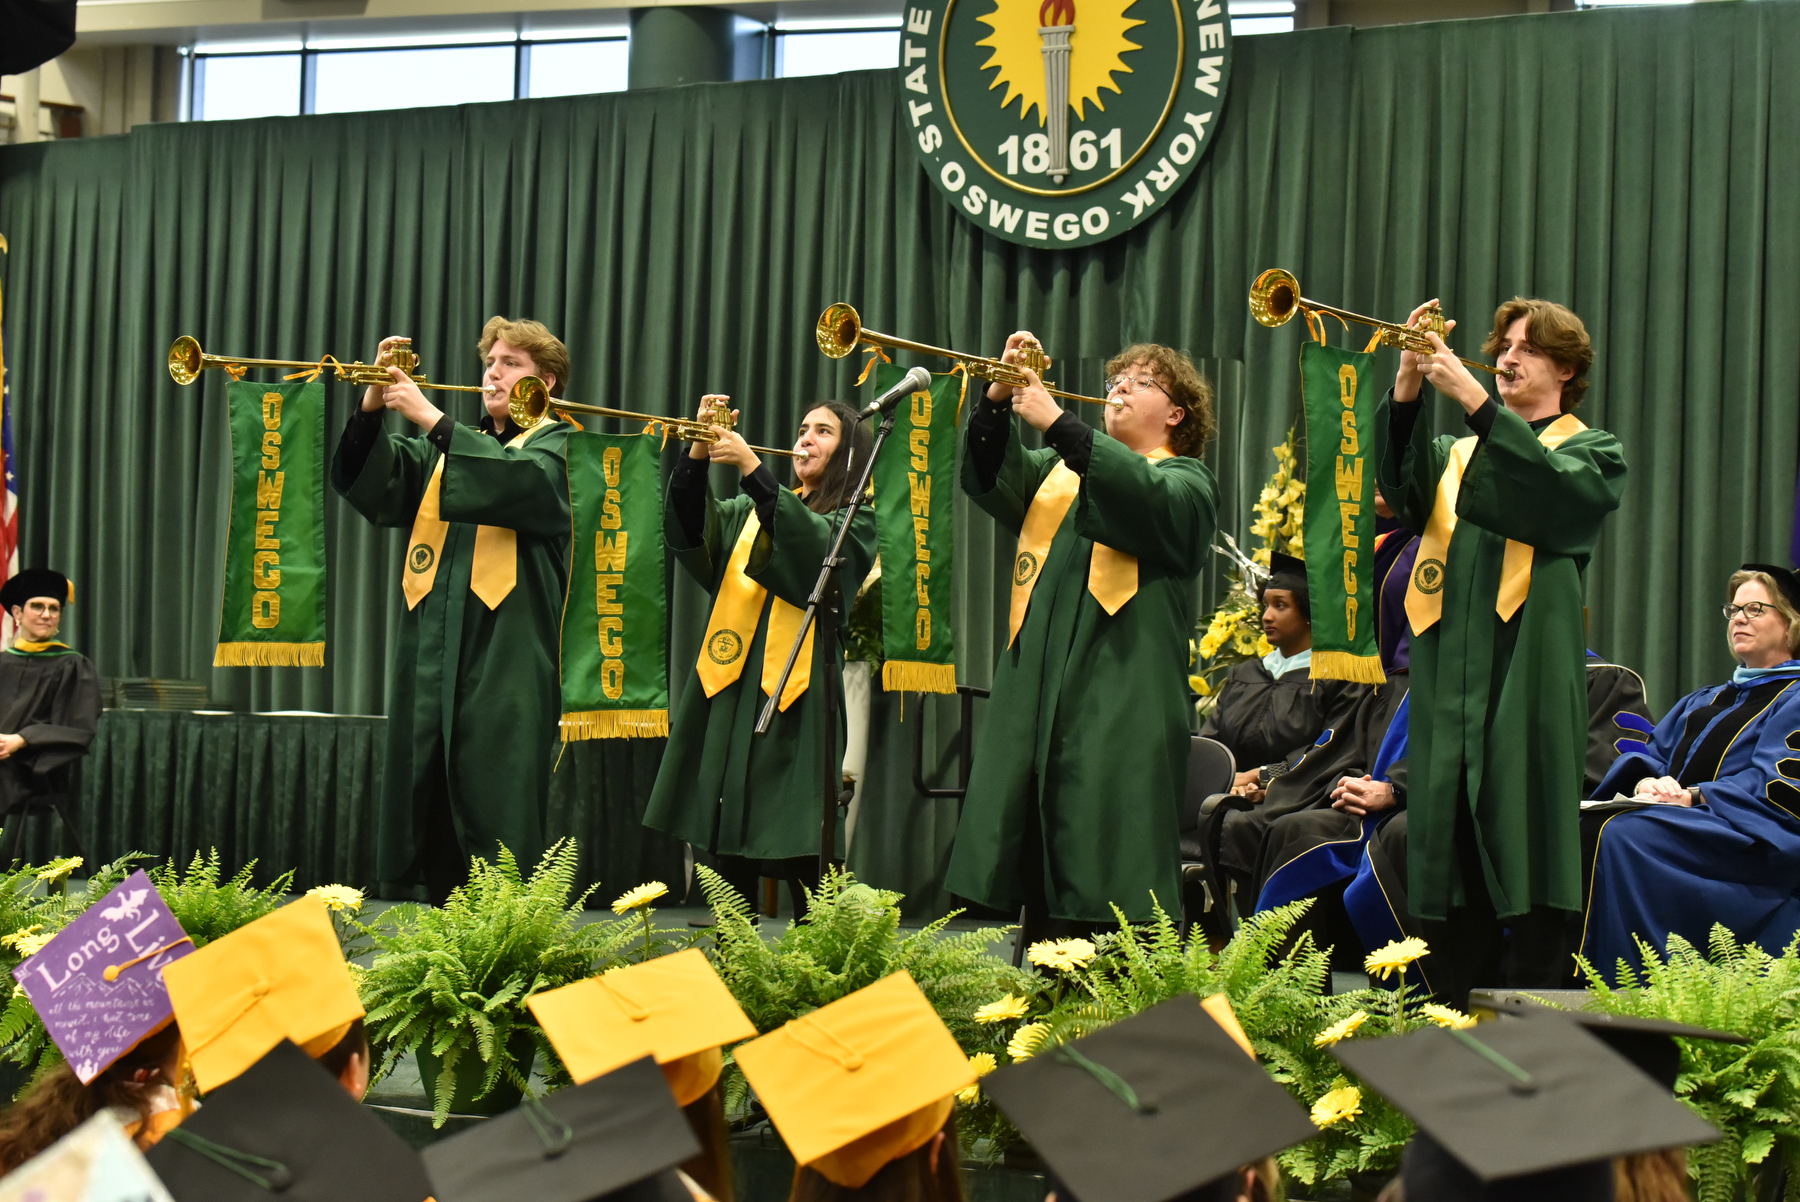 Trumpeters signal the conclusion of the School of Business ceremony held at 12:30 p.m., the second of three Commencement ceremonies on Saturday, May 11.